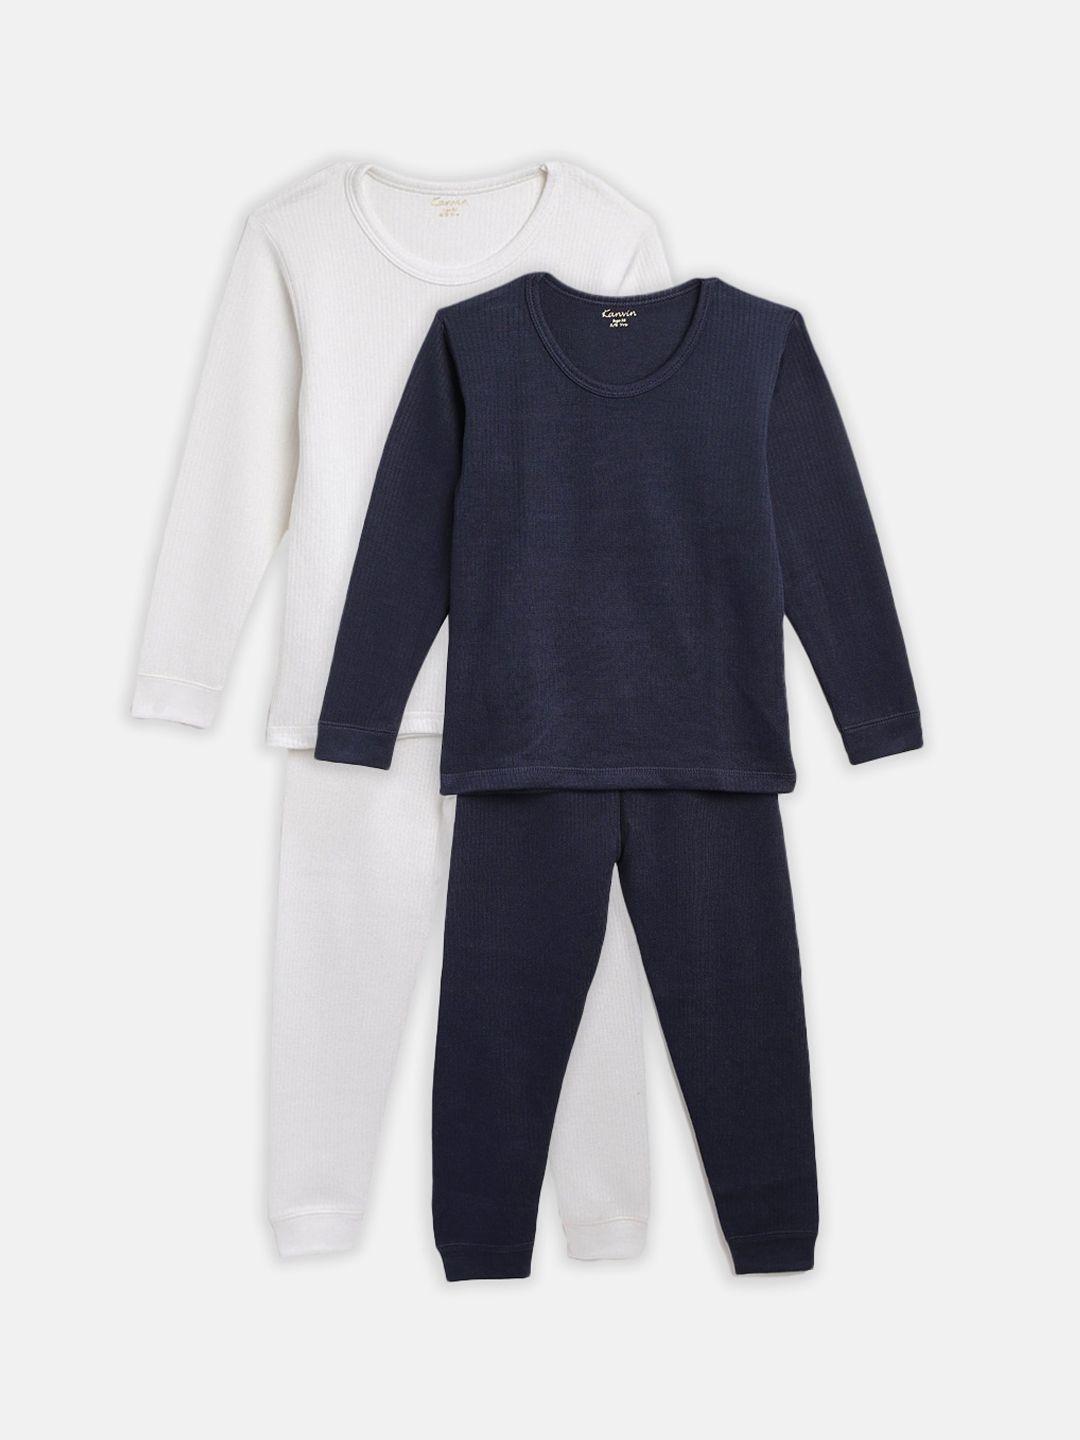 kanvin boys pack of 2 navy blue & white solid thermal set